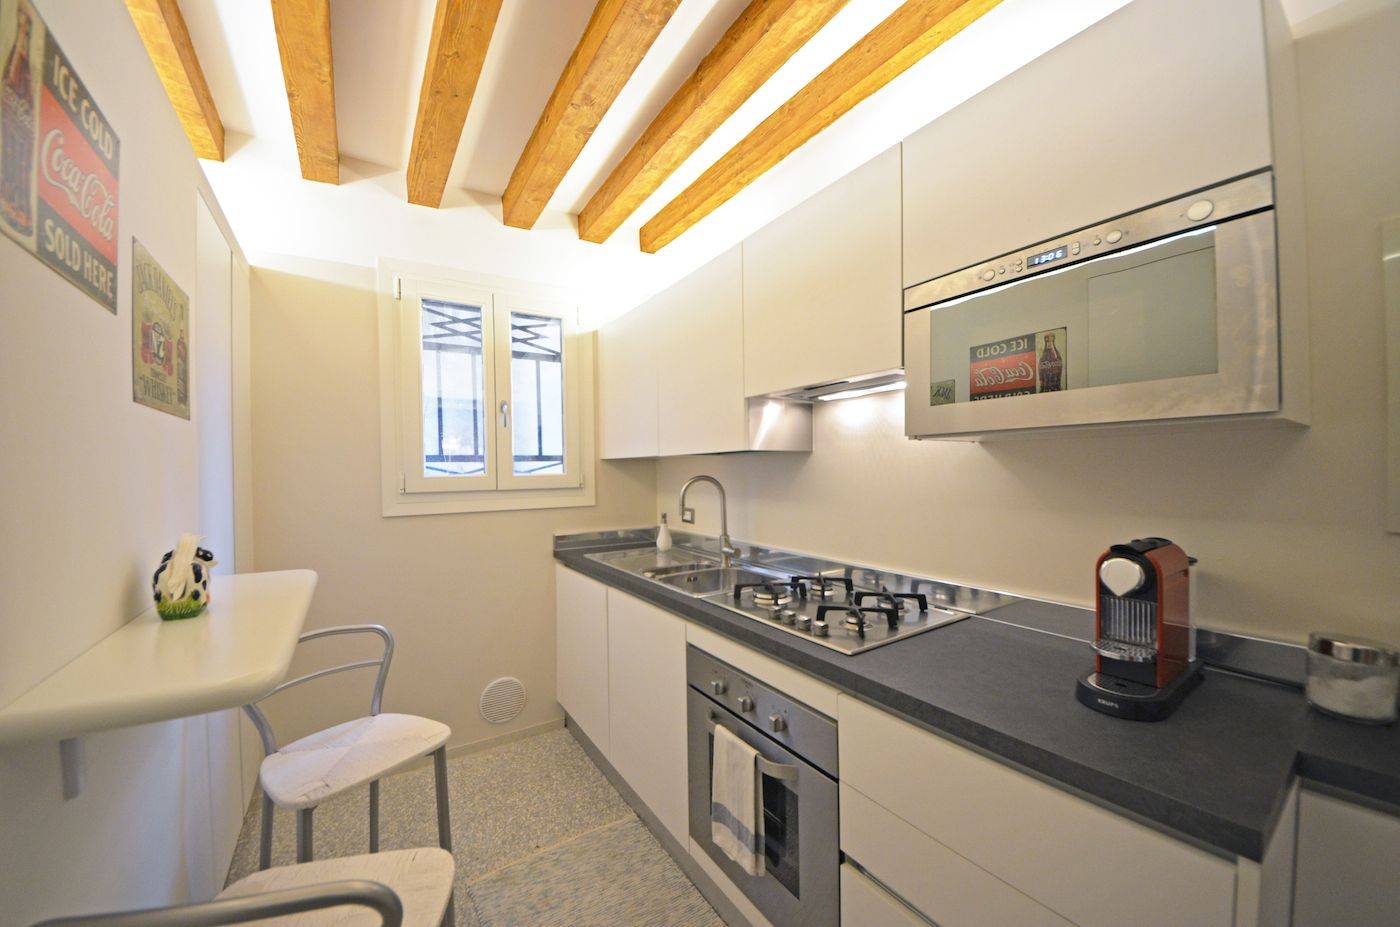 brand new and well eqipped kitchen of the Palladio Garden apartment